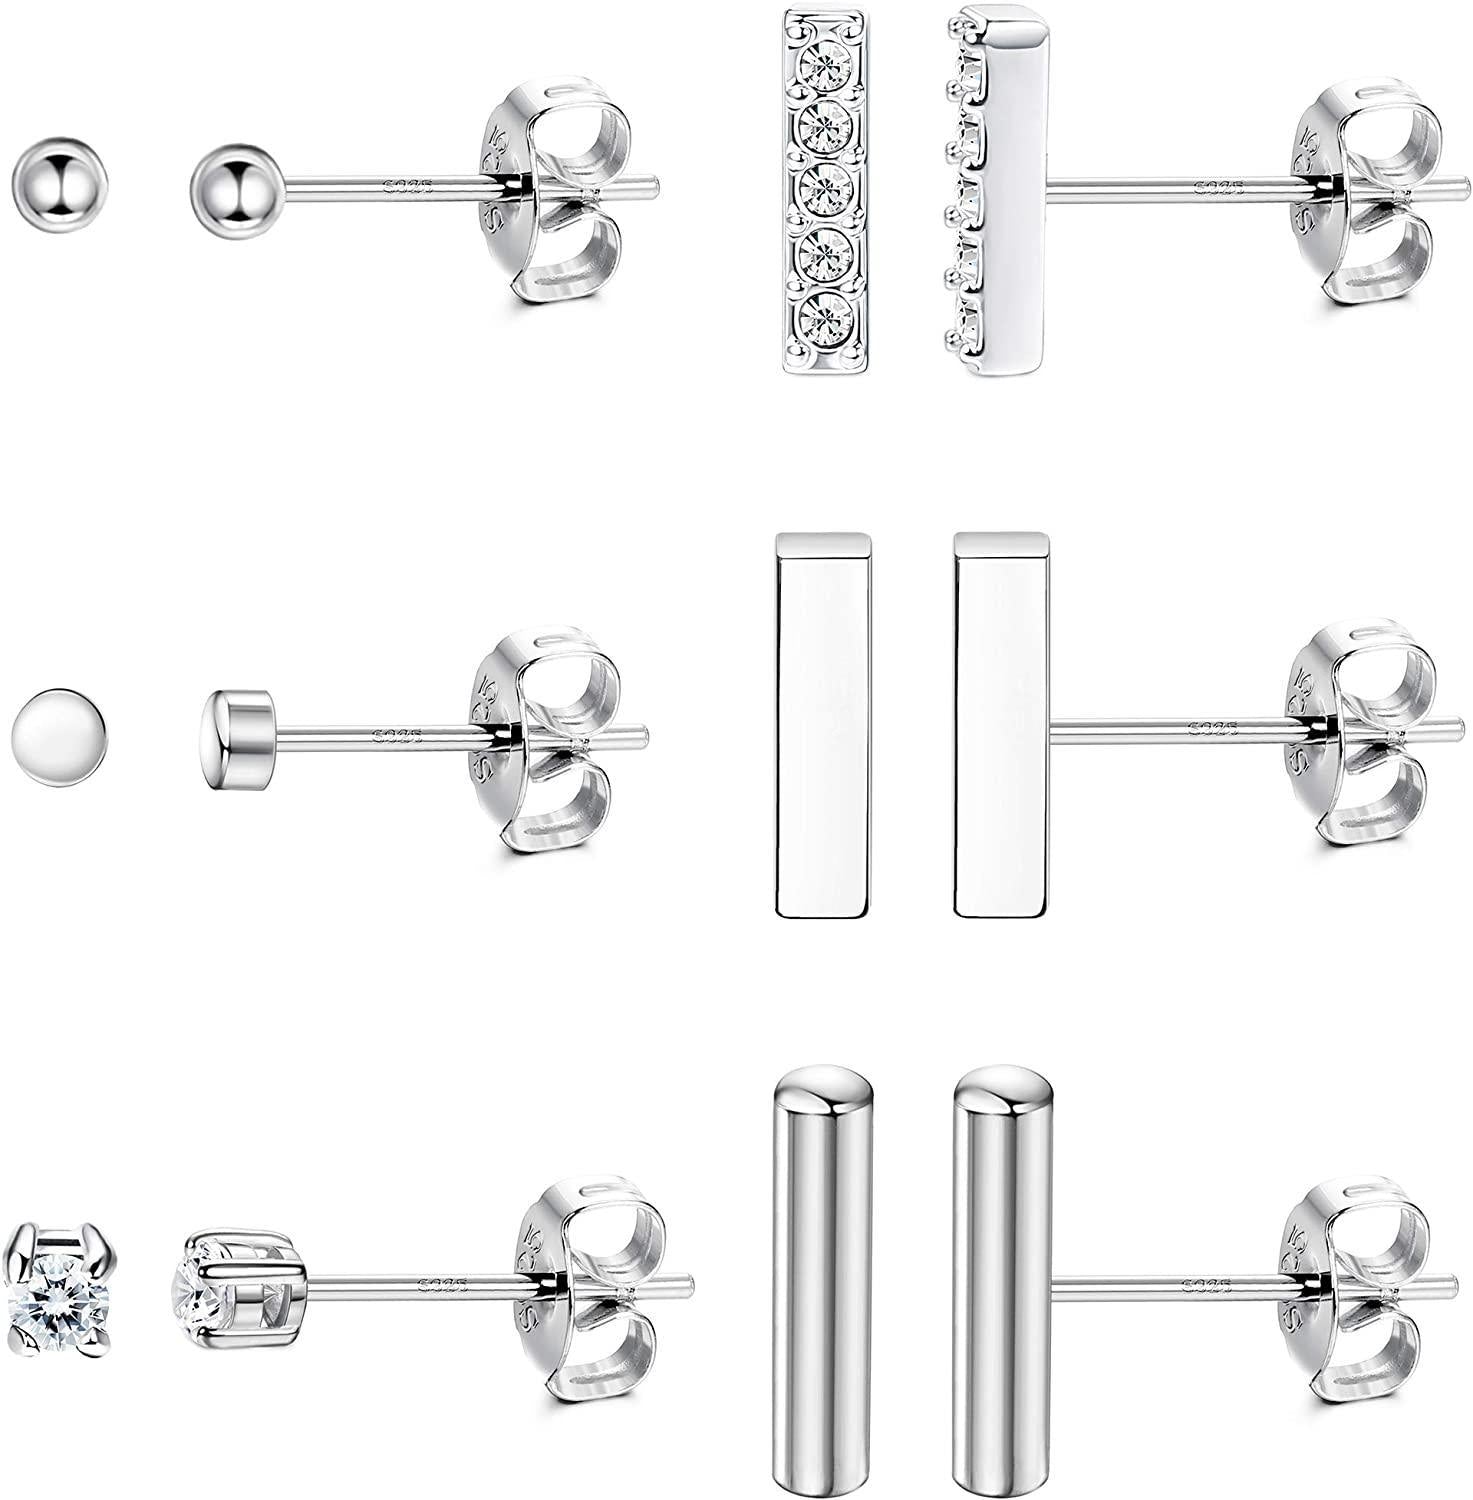 Sentence with replaced product: A collection of various designs of 6 Pairs 925 Sterling Silver 2mm Tiny Stud Earrings Set for Women Men Mini Ball Bar(7.5mm/9mm) CZ Disc Dot Earrings Line Stick Earrings Valentine's Day Gifts, featuring tiny stud earrings and bars embellished with crystals.